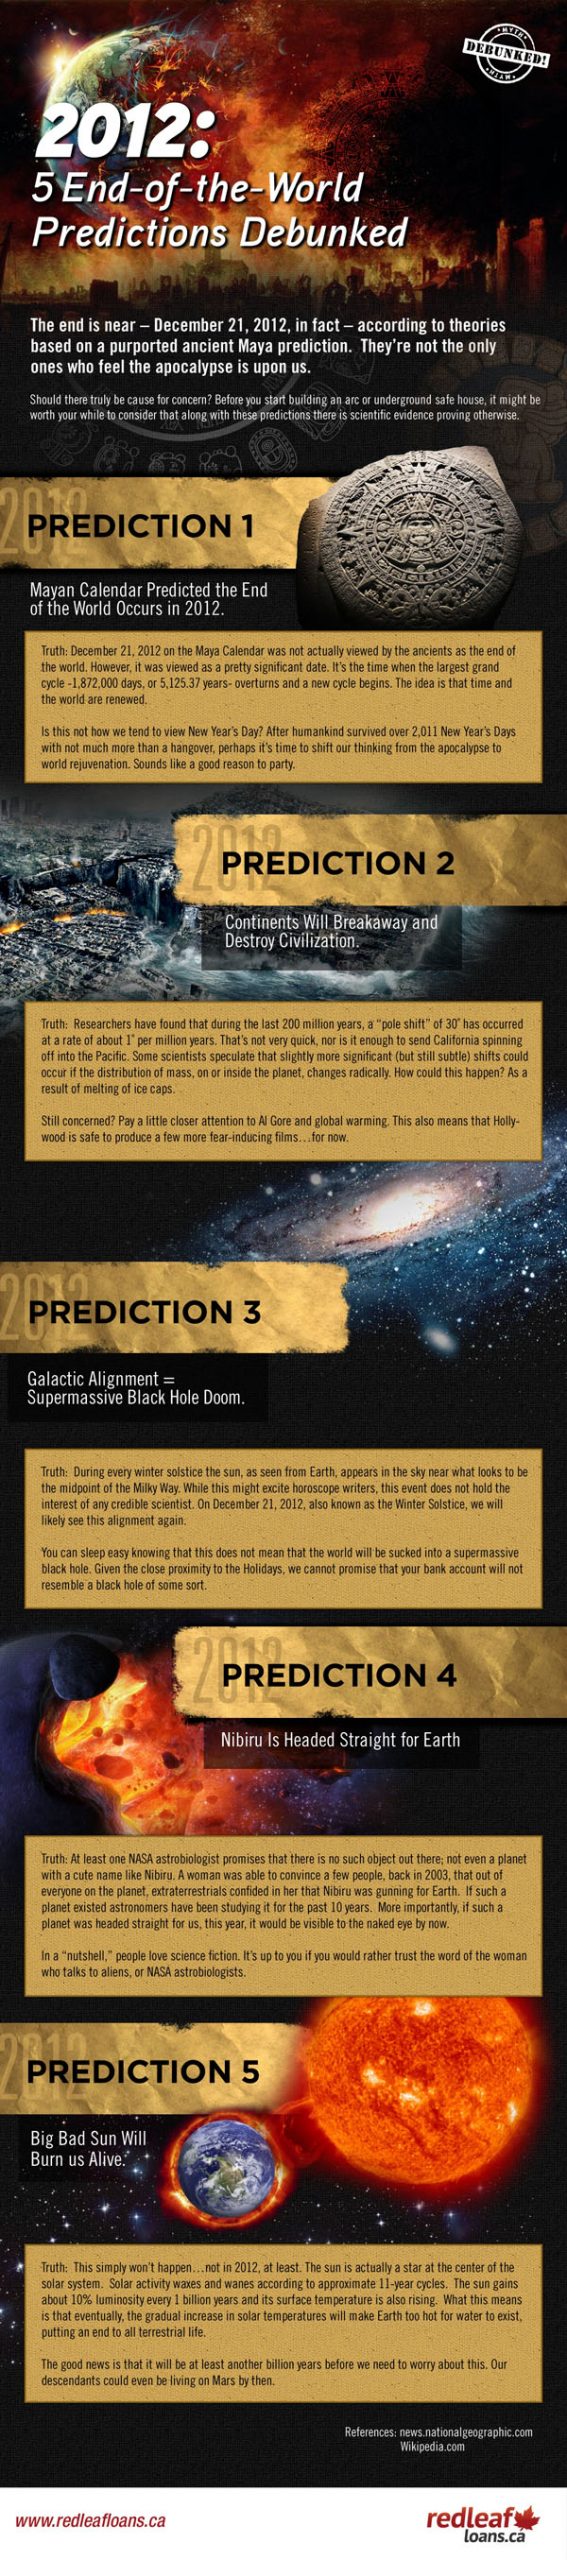 2012 5 end of the world predications debunked